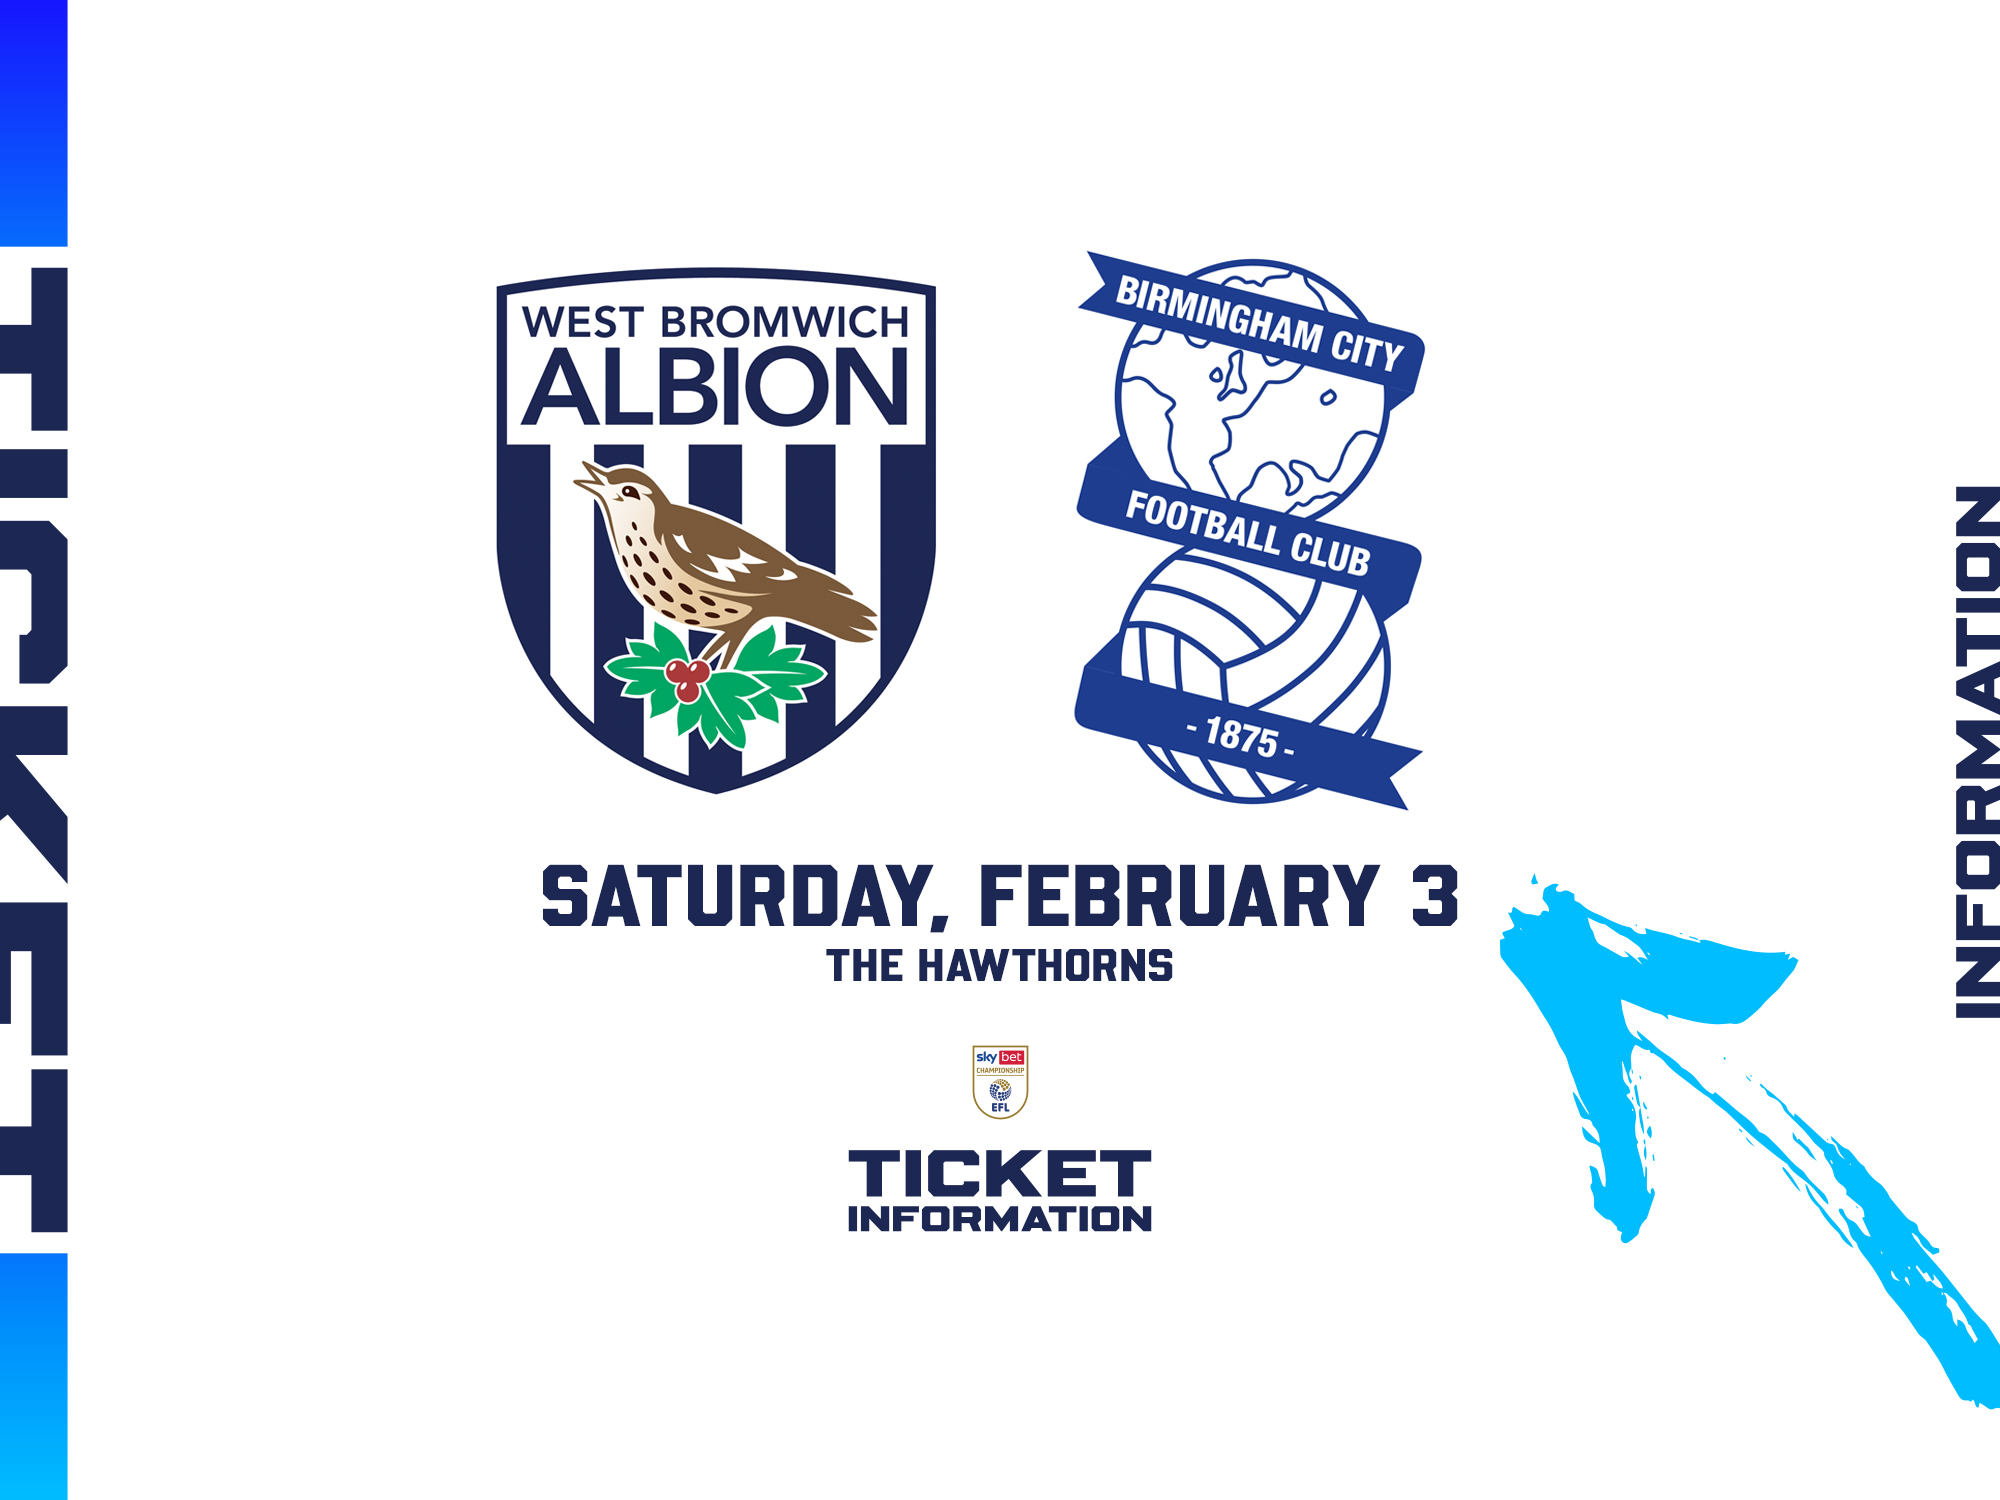 A ticket graphic displaying information for Albion's game against Birmingham City